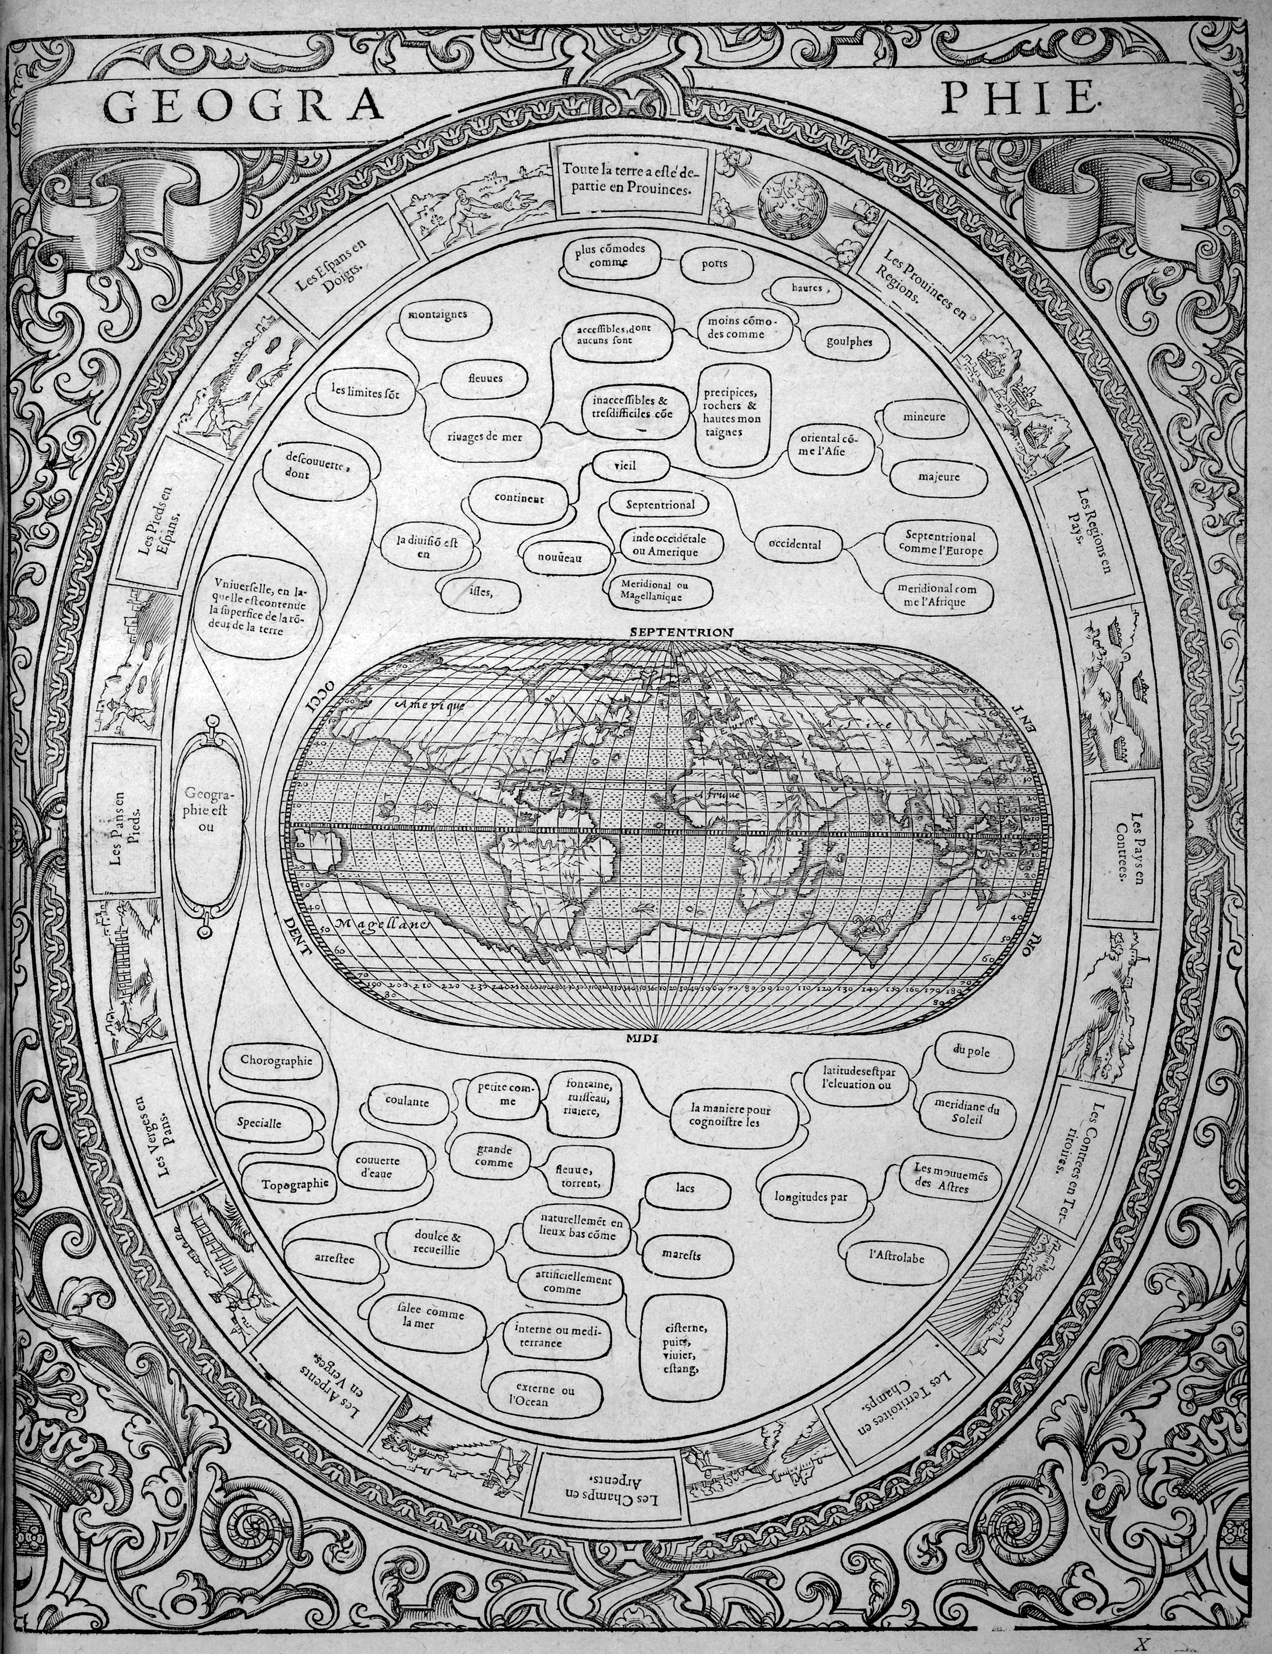 Christophe de Savigny, ca. 1530–1608. “Geographie.” Woodcut engraving, 40.2 × 31 cm. From his Tableaux published in 1587